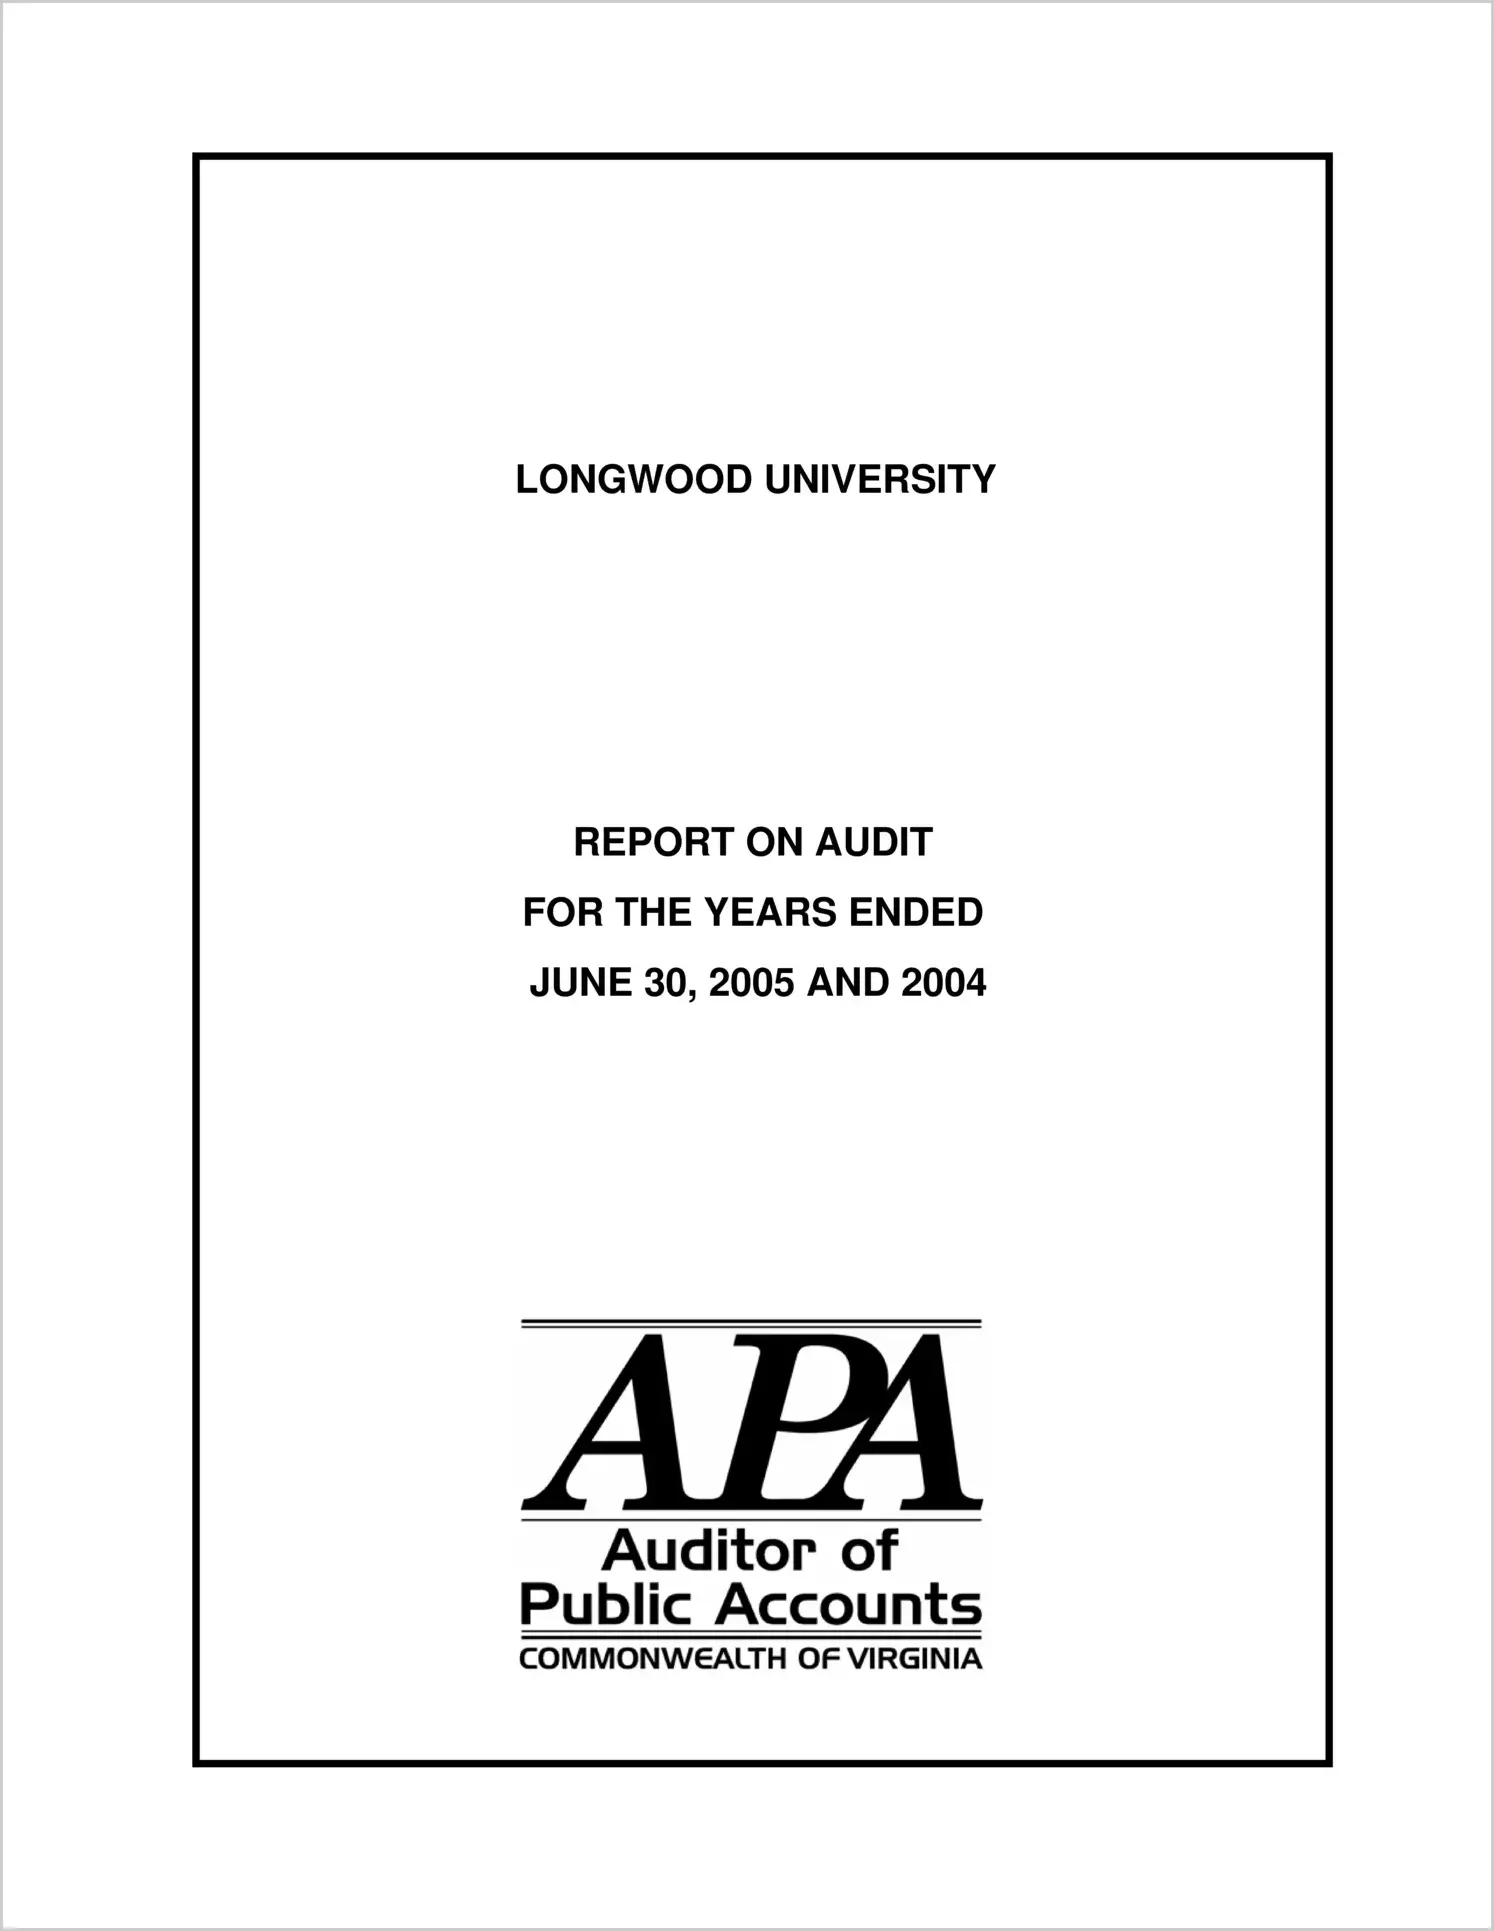 Longwood University for the years ended June 30, 2004 through 2005